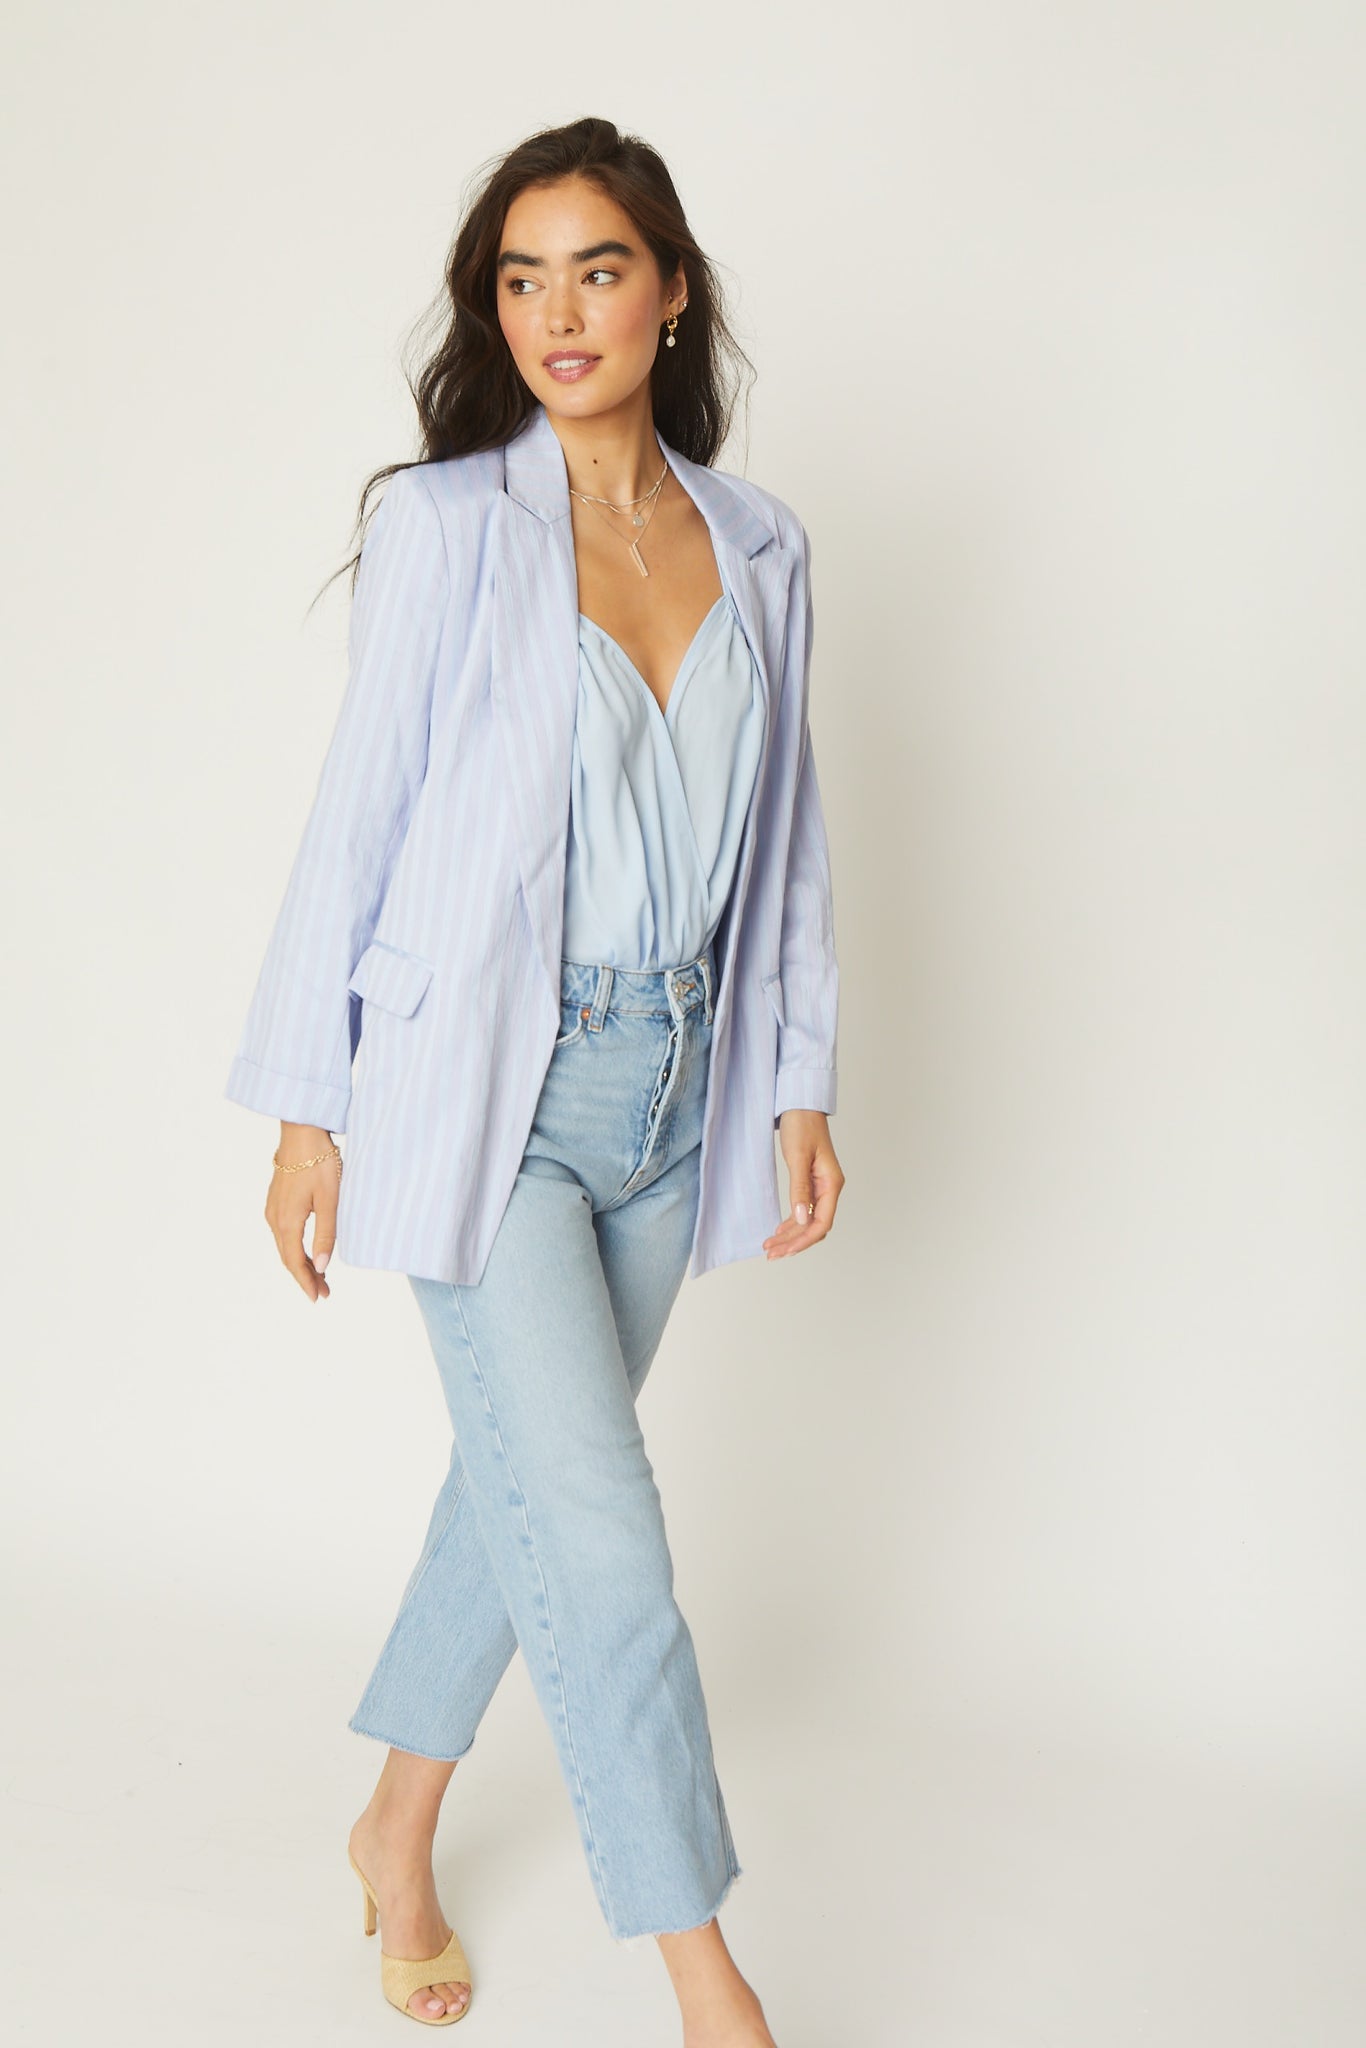 Madison jacket, oversized fit, linen blend , lustrous, sheen fabric, front pocket, open front, cuffed sleeve, light blue color